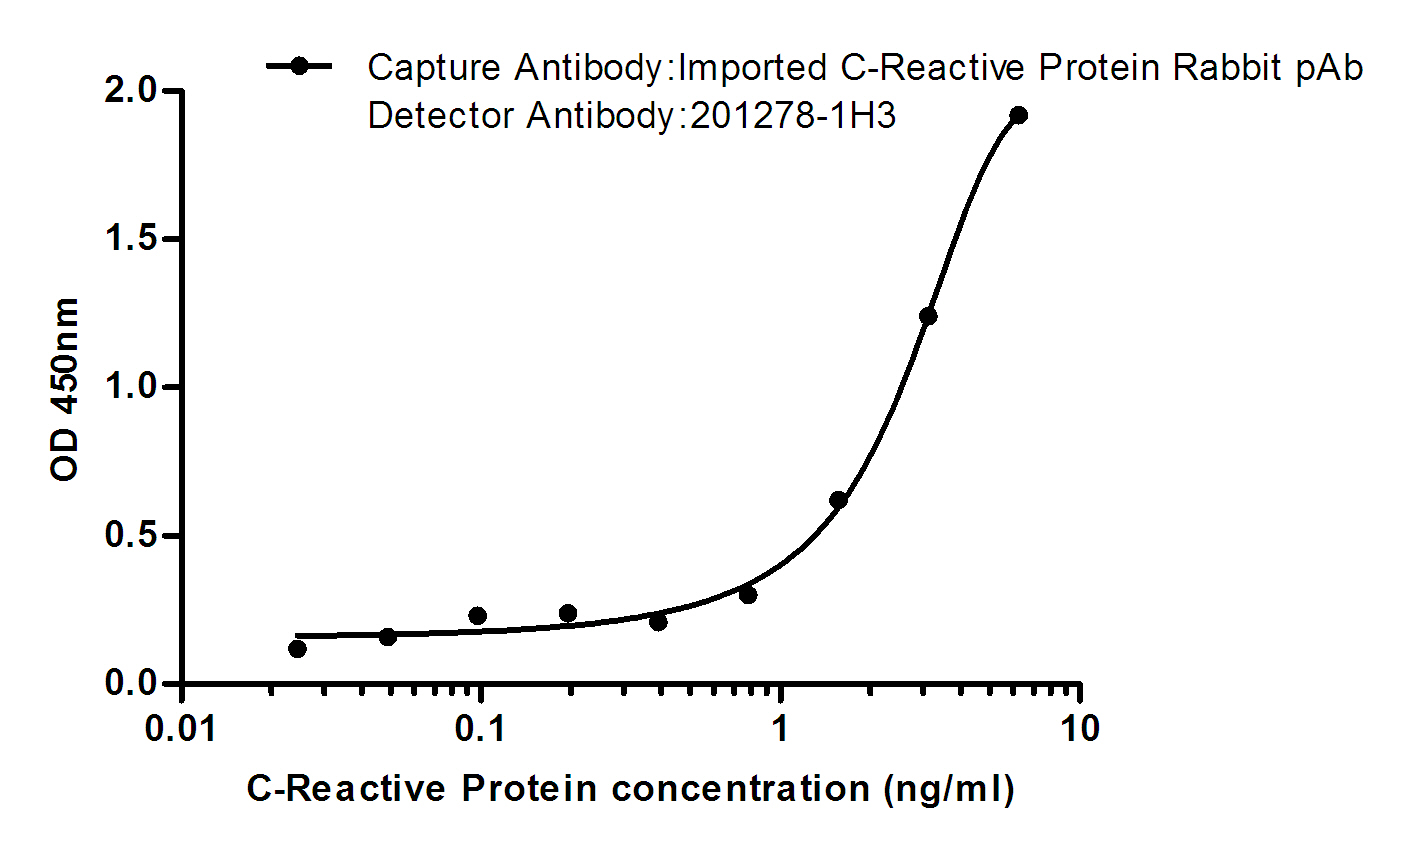 sELISA standard Curve for C-Reactive Protein: Capture Antibody Rabbit pAb to C-Reactive Protein at 4ug/ml and 168074 was used for detecting.